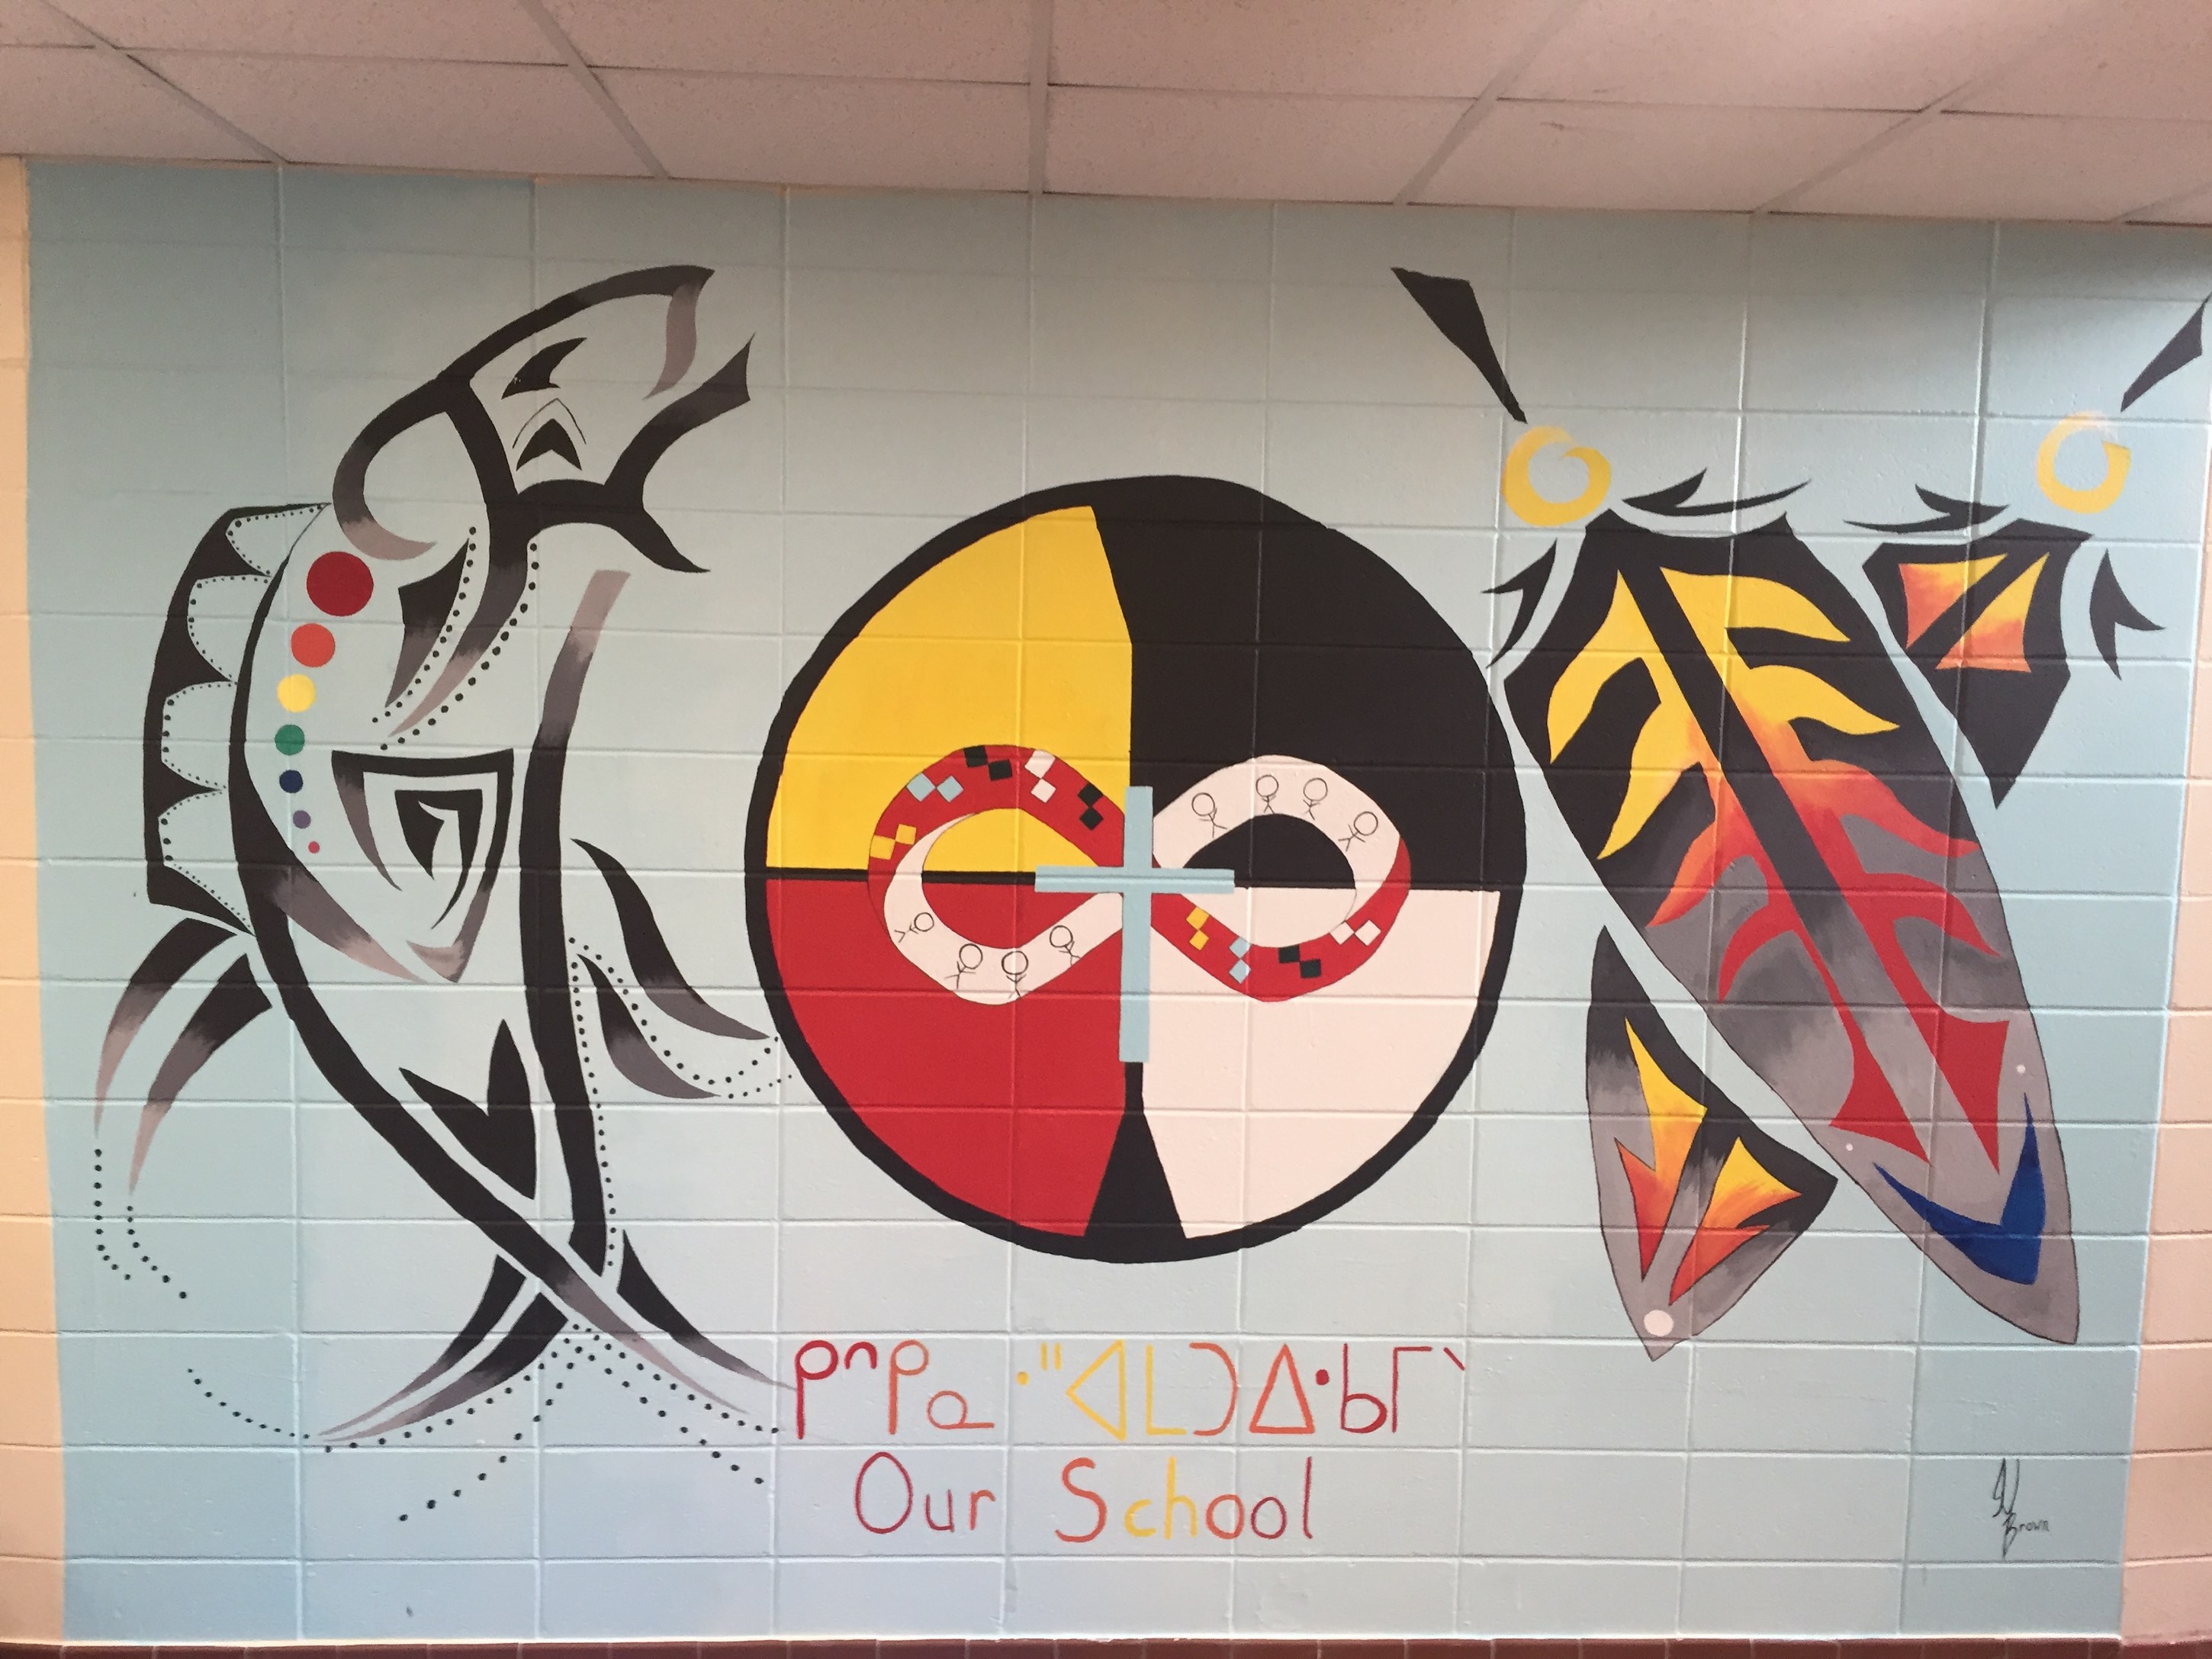 A mural on a school mall that mackenzie painted and designed